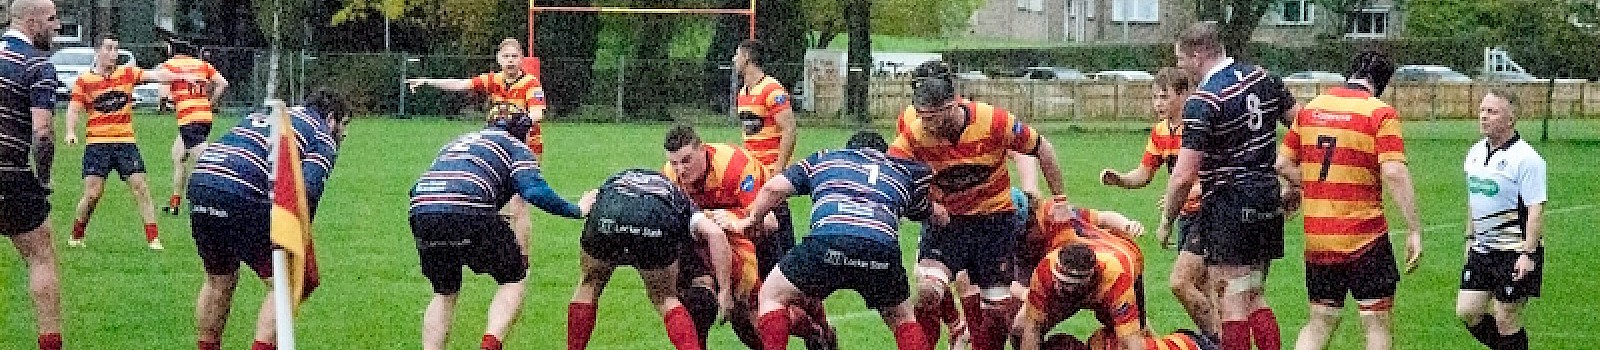 West gain bonus point win with last minute try